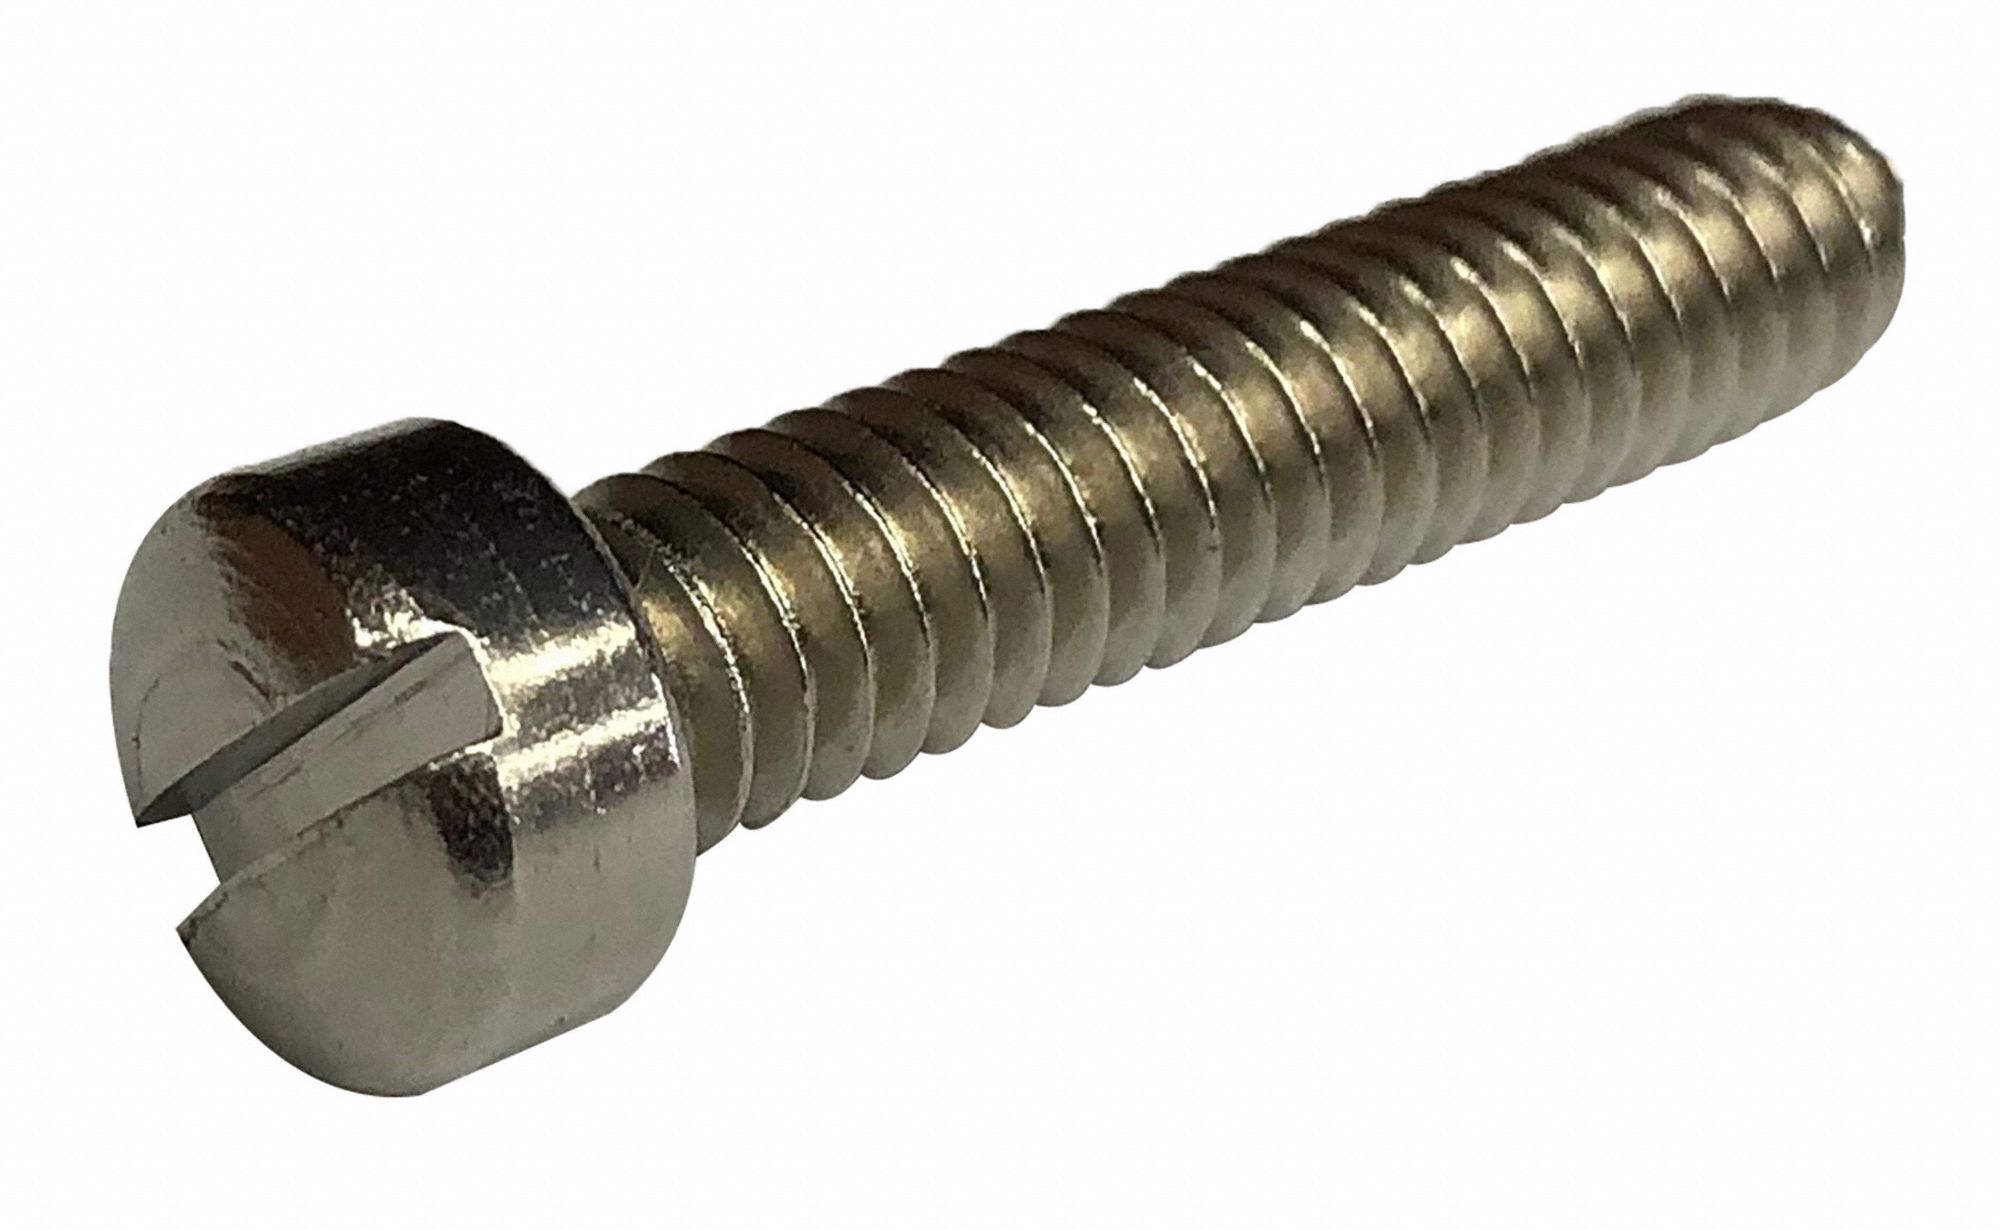 10-32 X 2 Slotted Fillister Machine Screw 18-8 Stainless Steel Package Qty 100